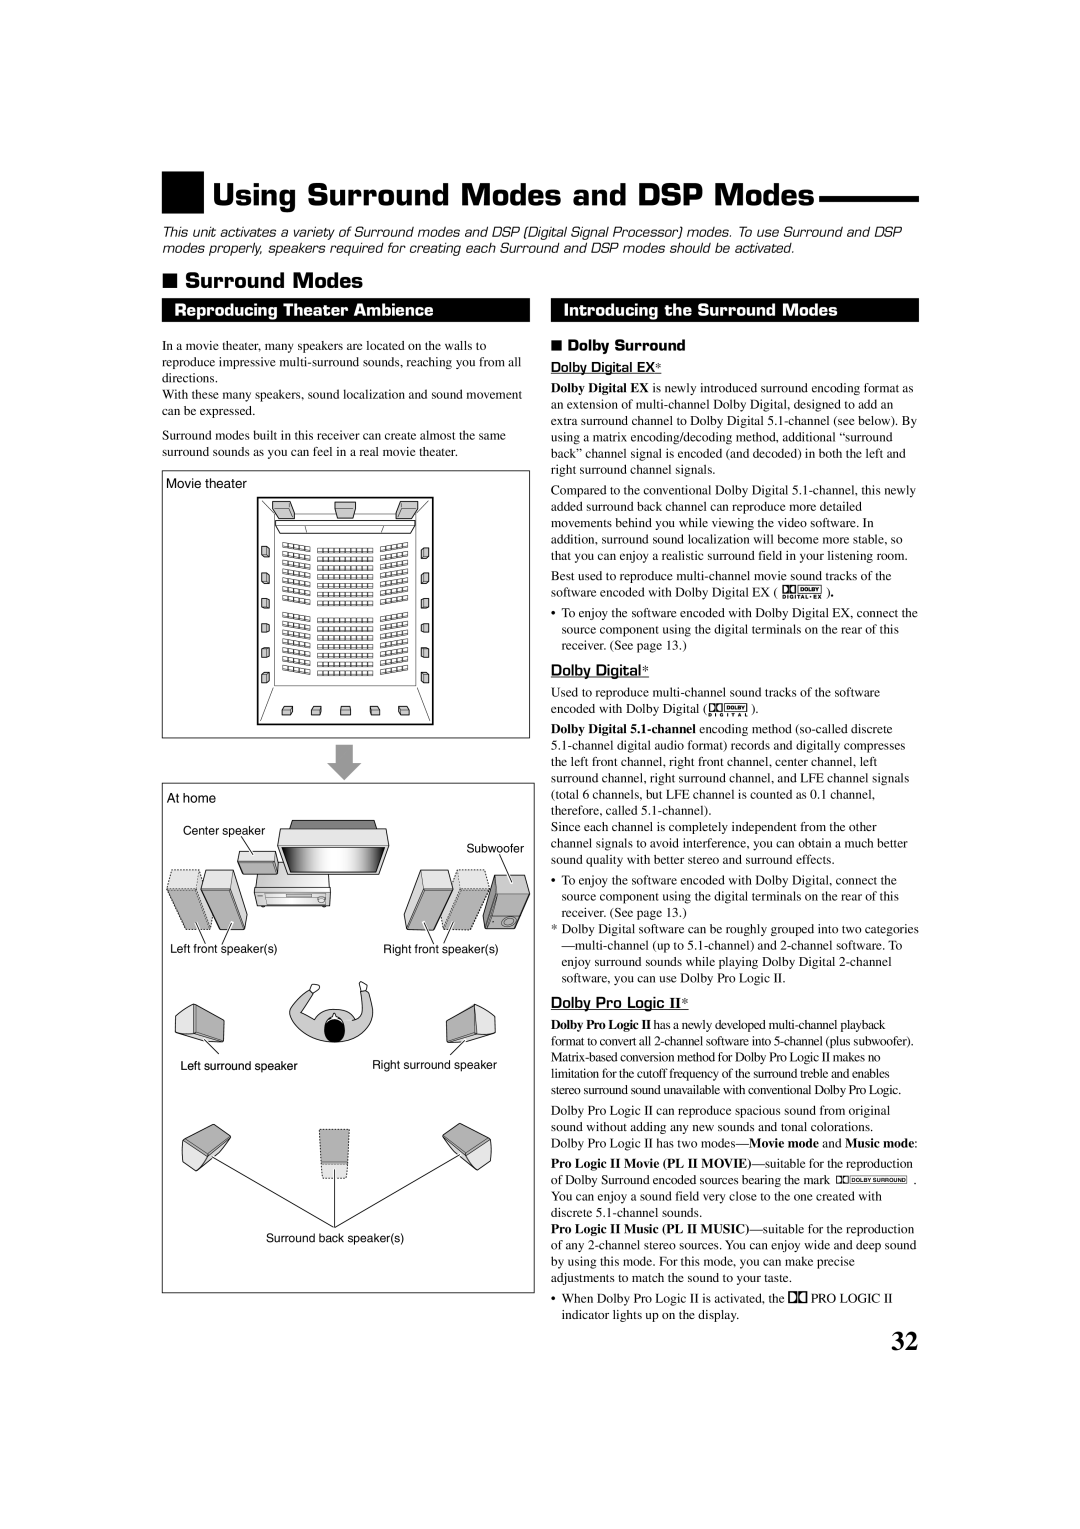 JVC RX-8022PSL manual Using Surround Modes and DSP Modes, Reproducing Theater Ambience, Introducing the Surround Modes 